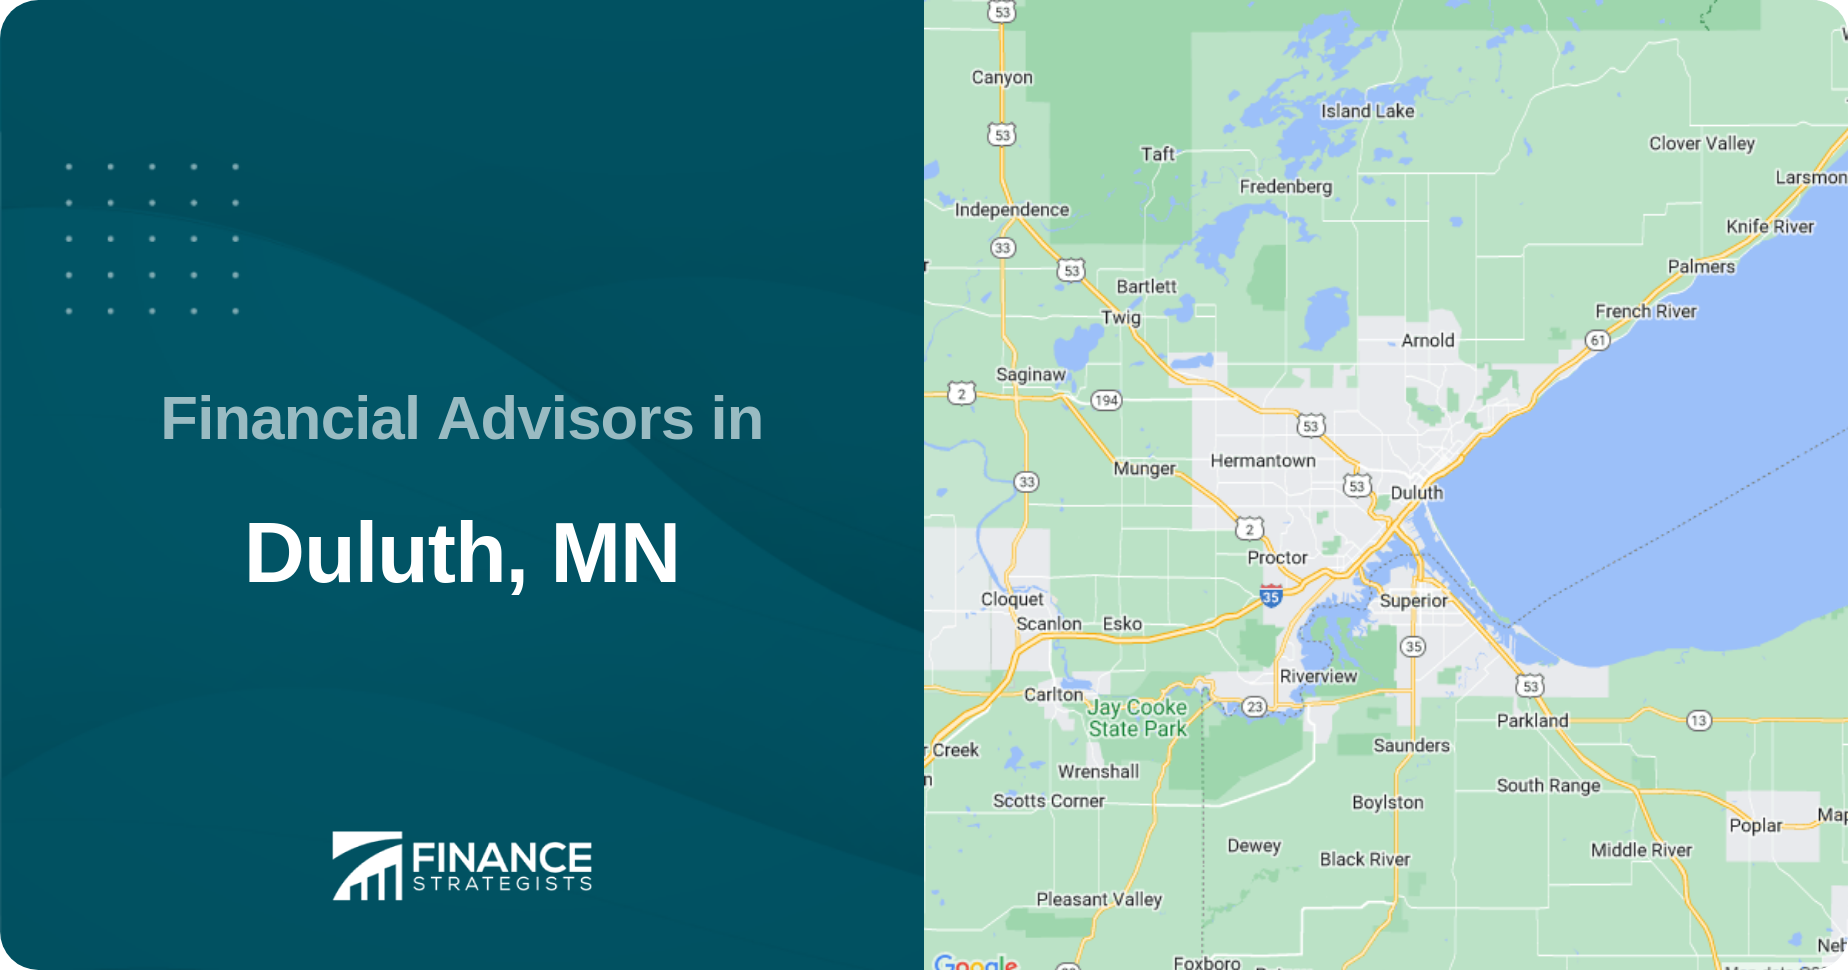 Financial Advisors in Duluth, MN